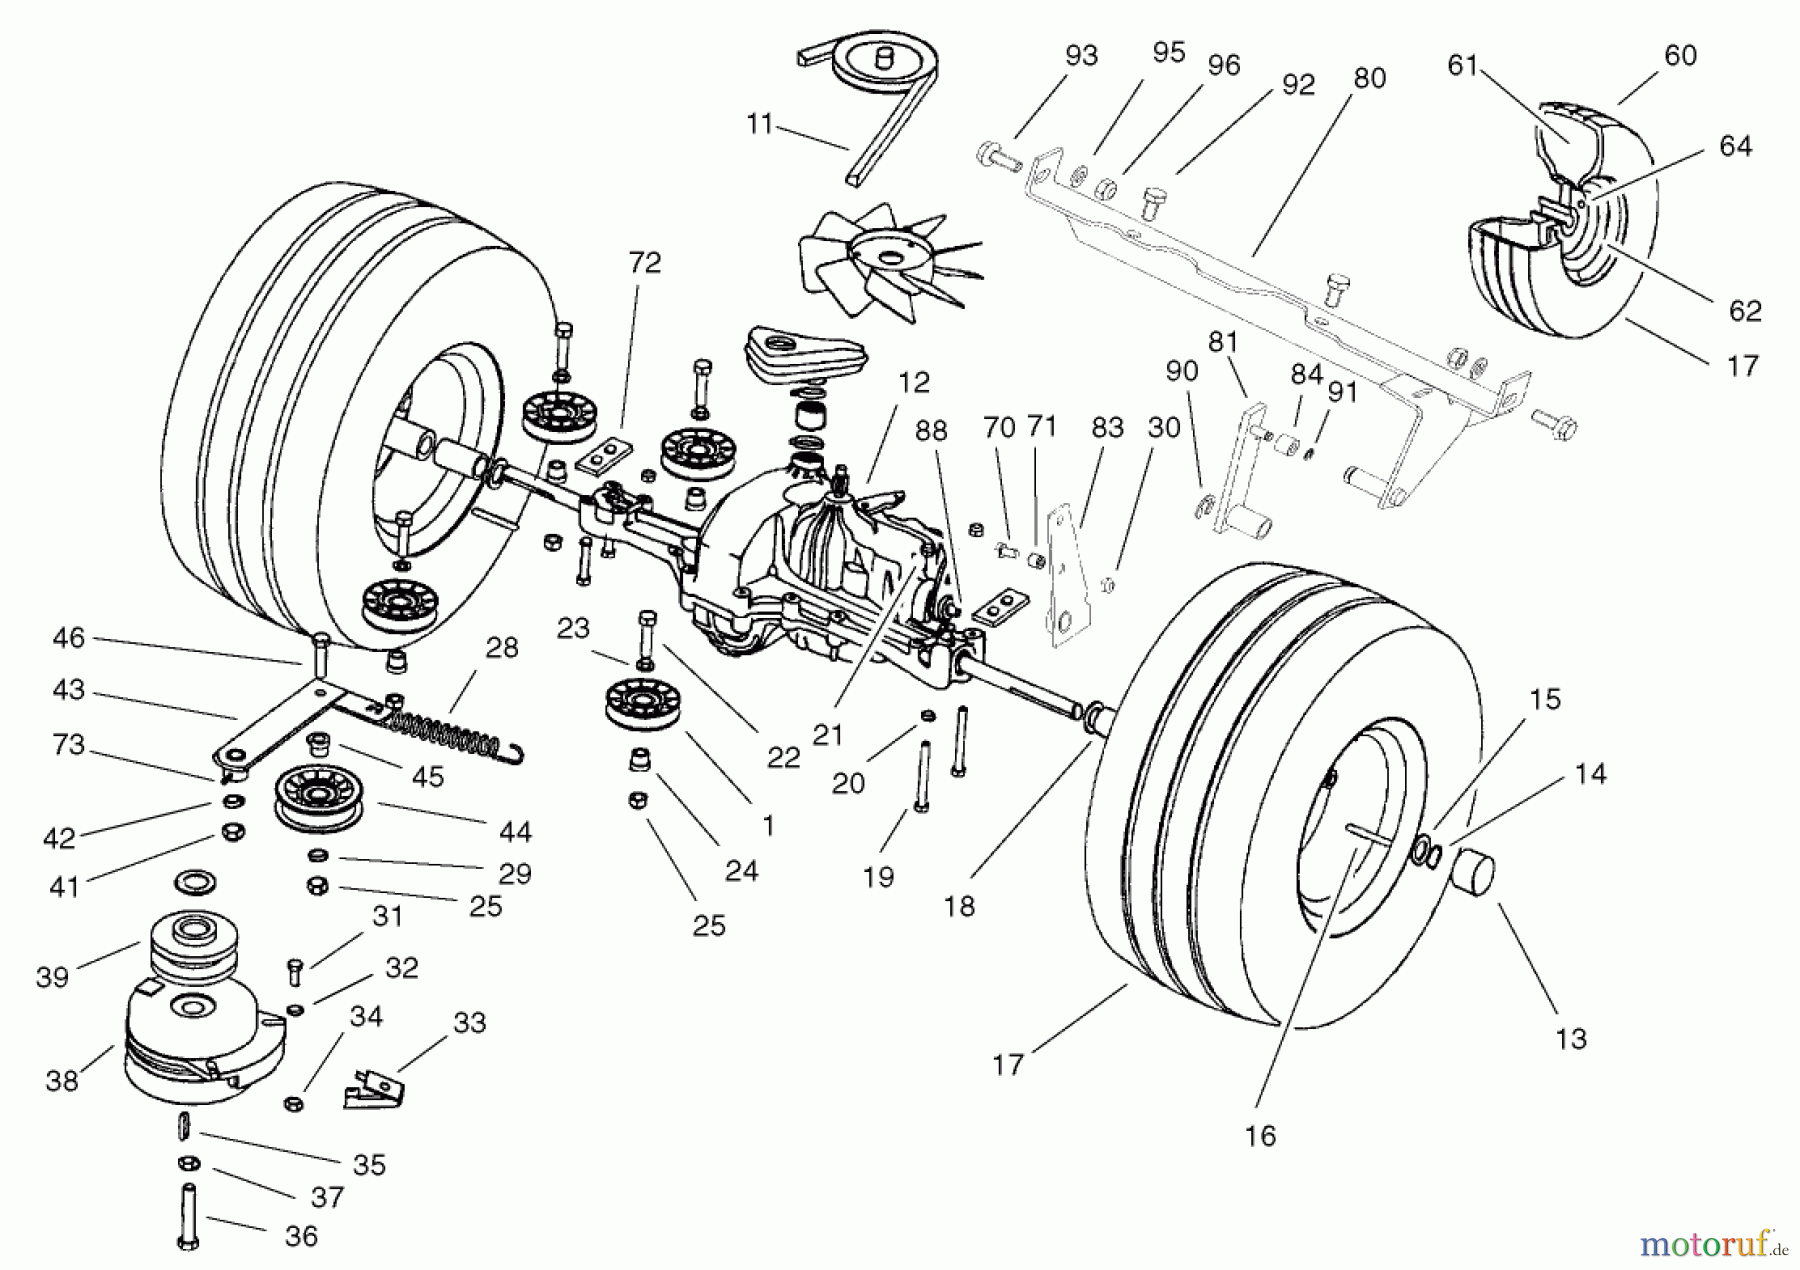  Toro Neu Mowers, Lawn & Garden Tractor Seite 1 74570 (170-DH) - Toro 170-DH Lawn Tractor, 2001 (210000001-210999999) TRANSMISSION DRIVE ASSEMBLY